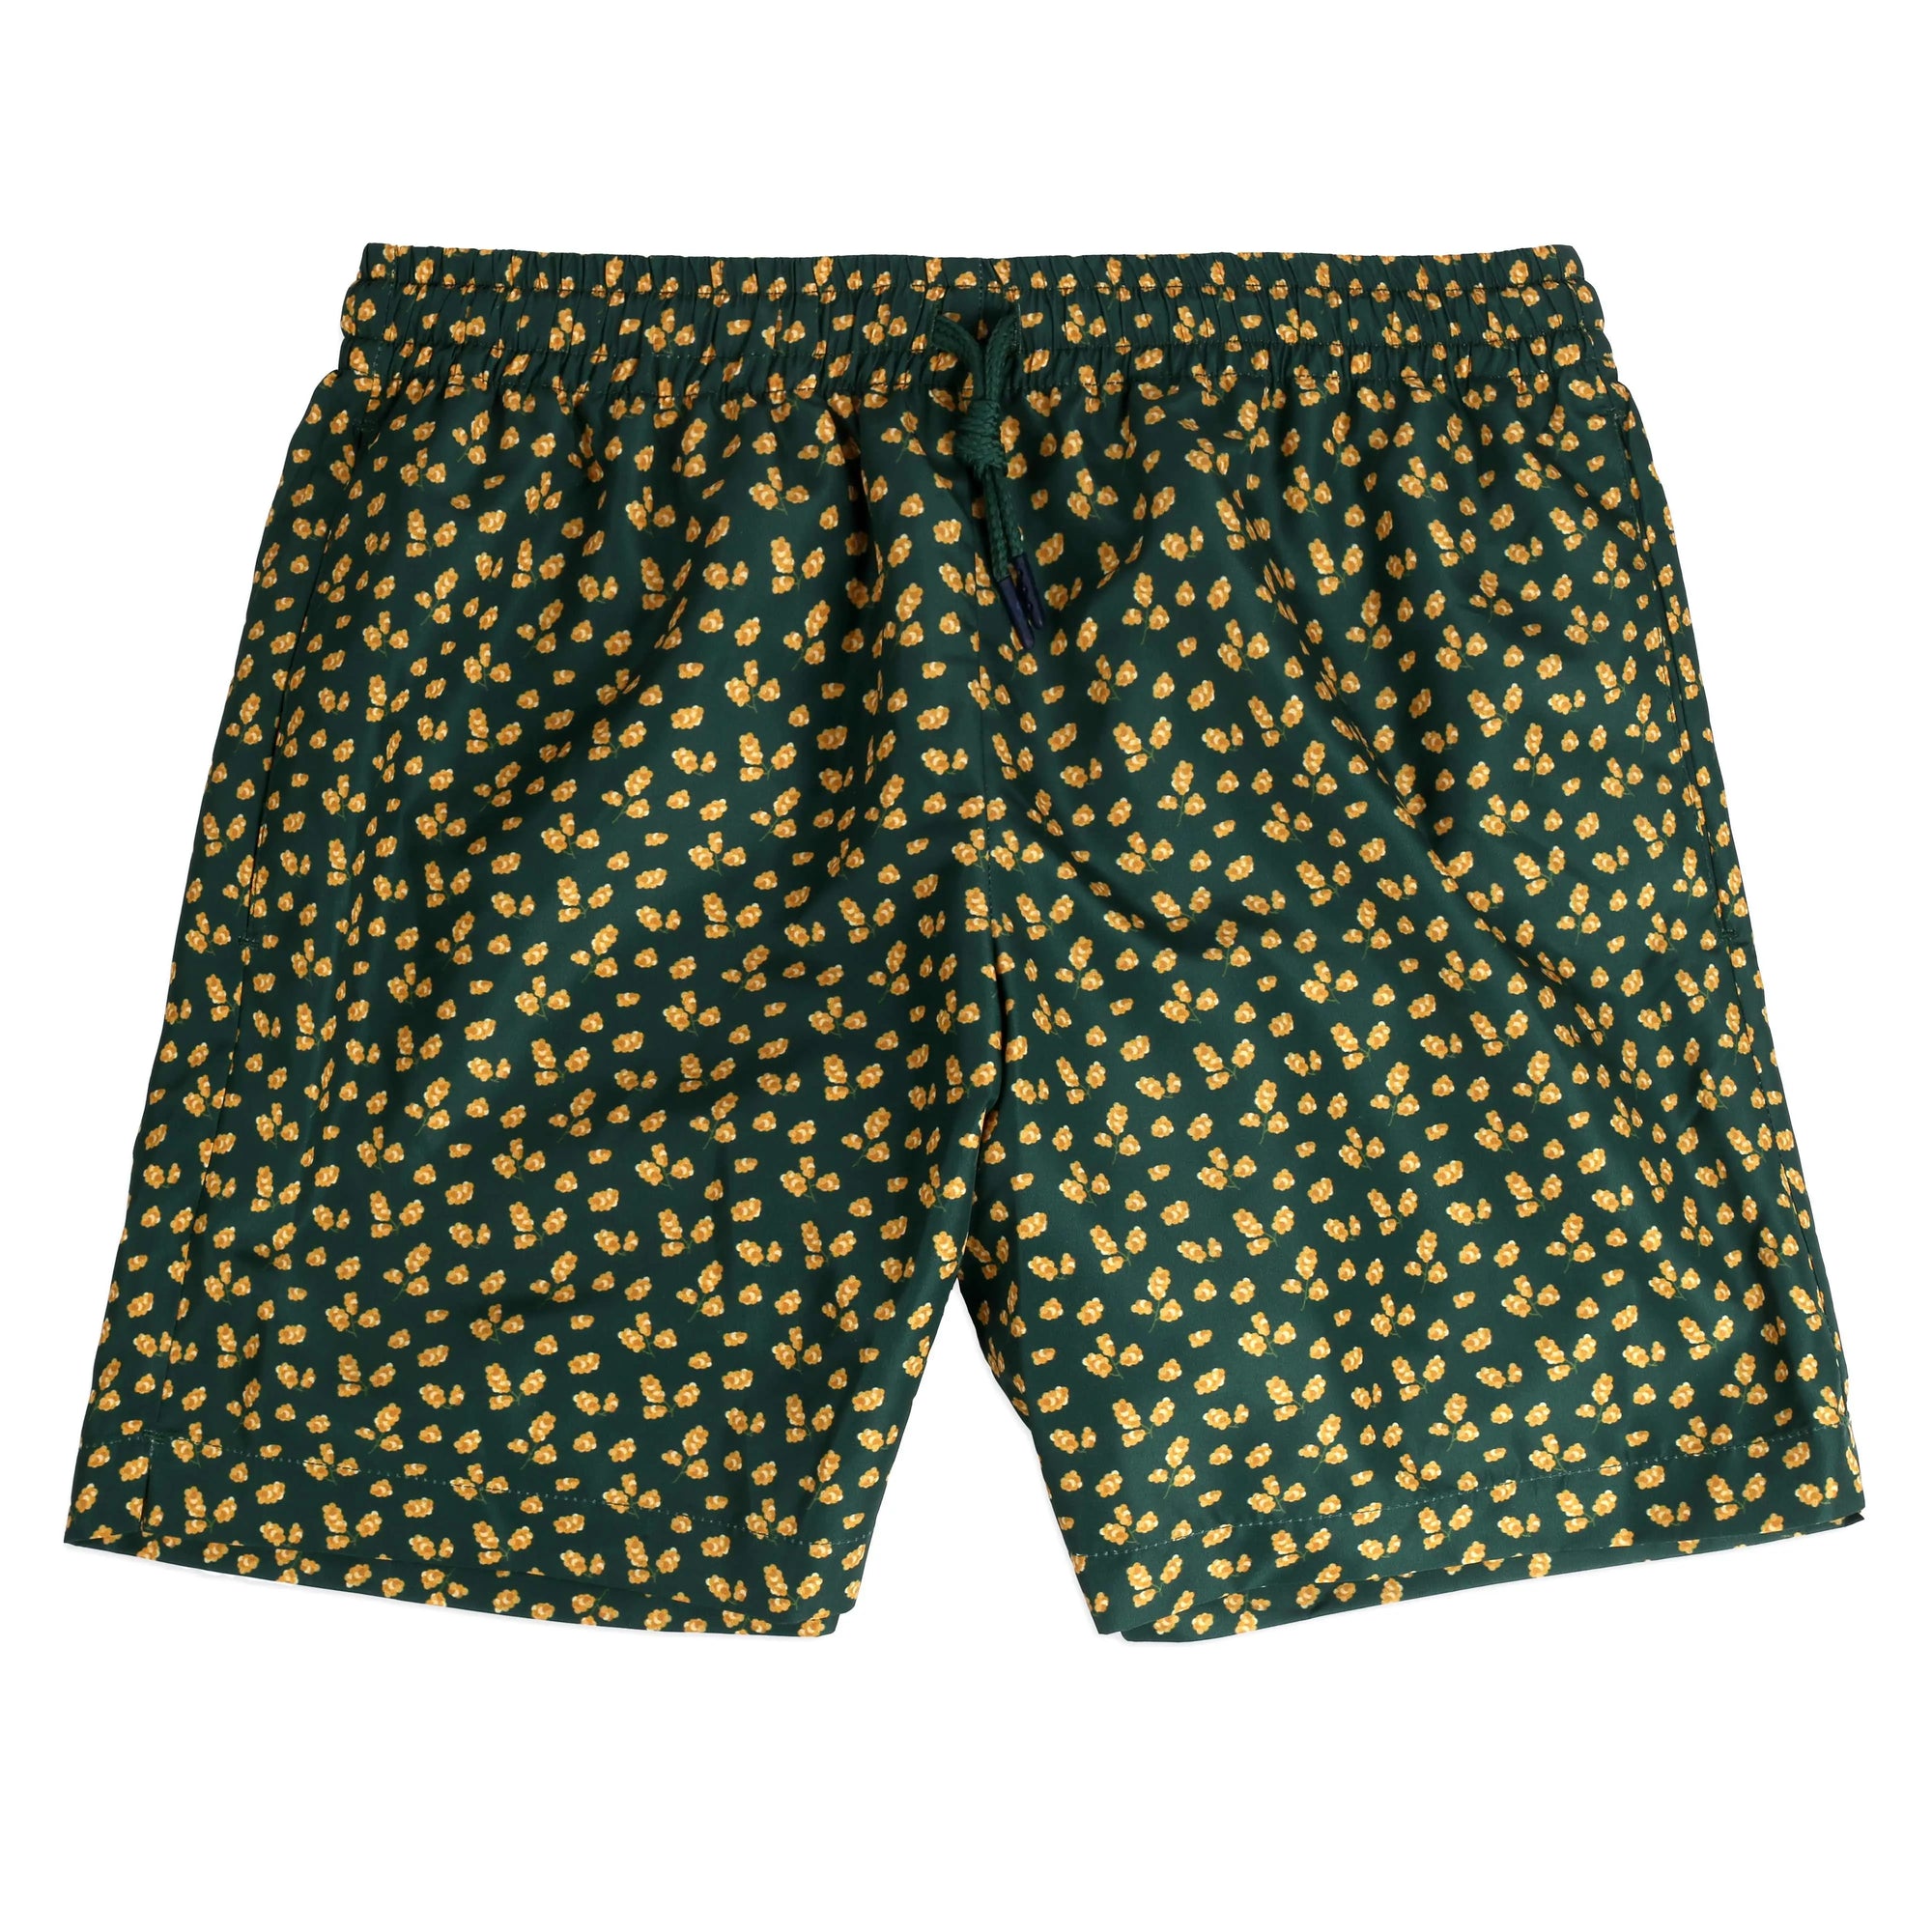 An open white box labeled "Bassal" reveals neatly folded dark green Mimosa Swimwear adorned with a yellow floral pattern. A smaller card with text lies on the swimwear, along with a small zipped bag containing a blue item. Discover this and more unique pieces at bassalstore, your go-to shop in Barcelona.